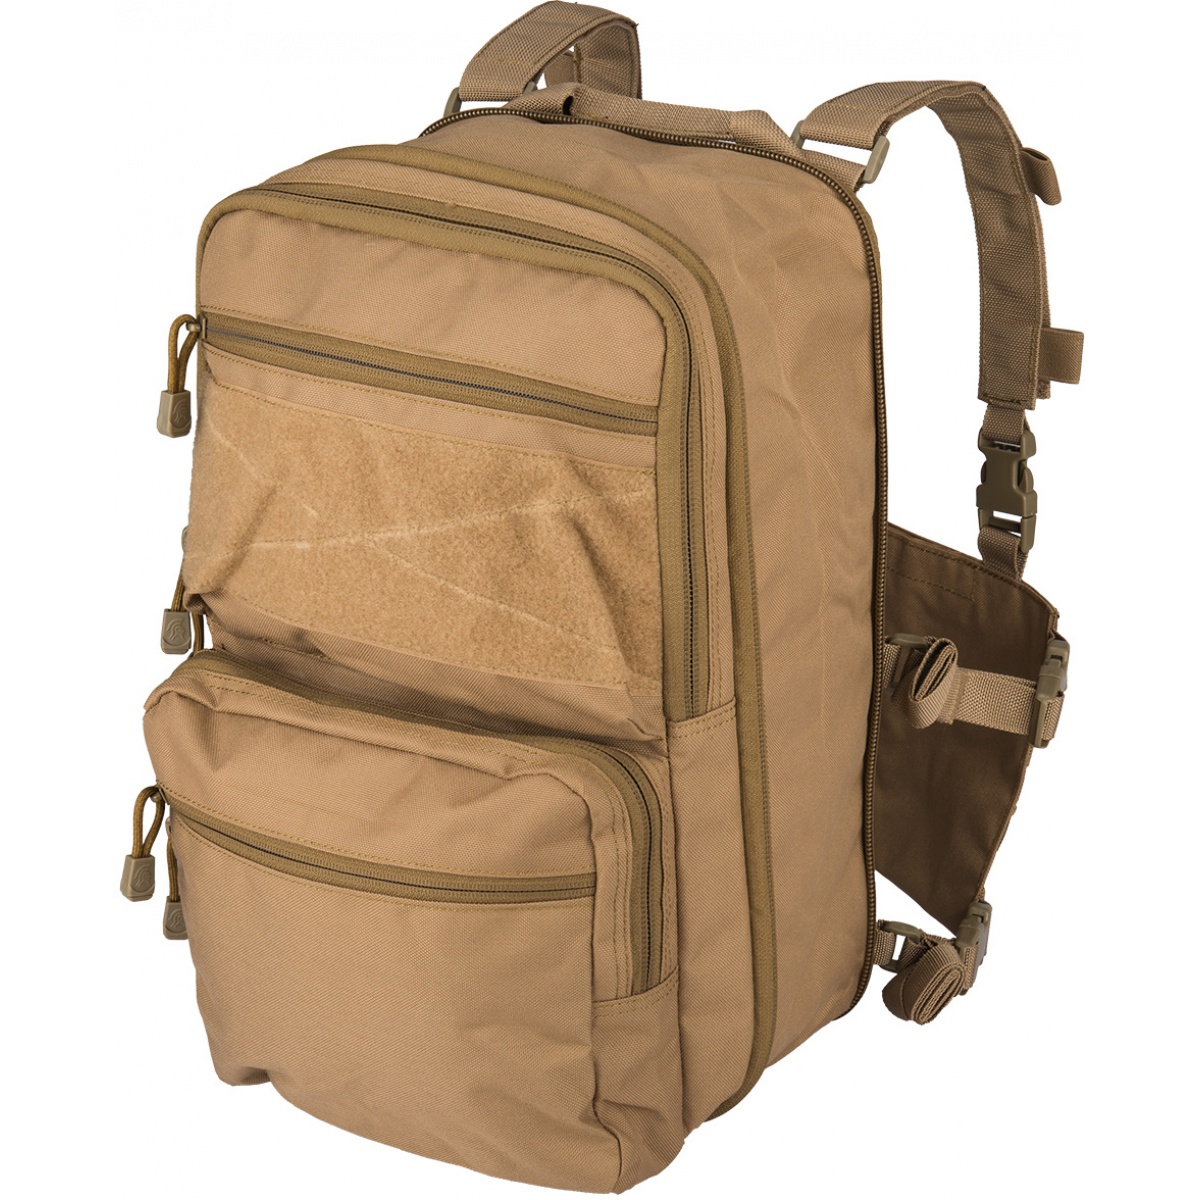 Lancer Tactical 1000D Nylon QD Chest Rig and Backpack Combo - KHAKI ...